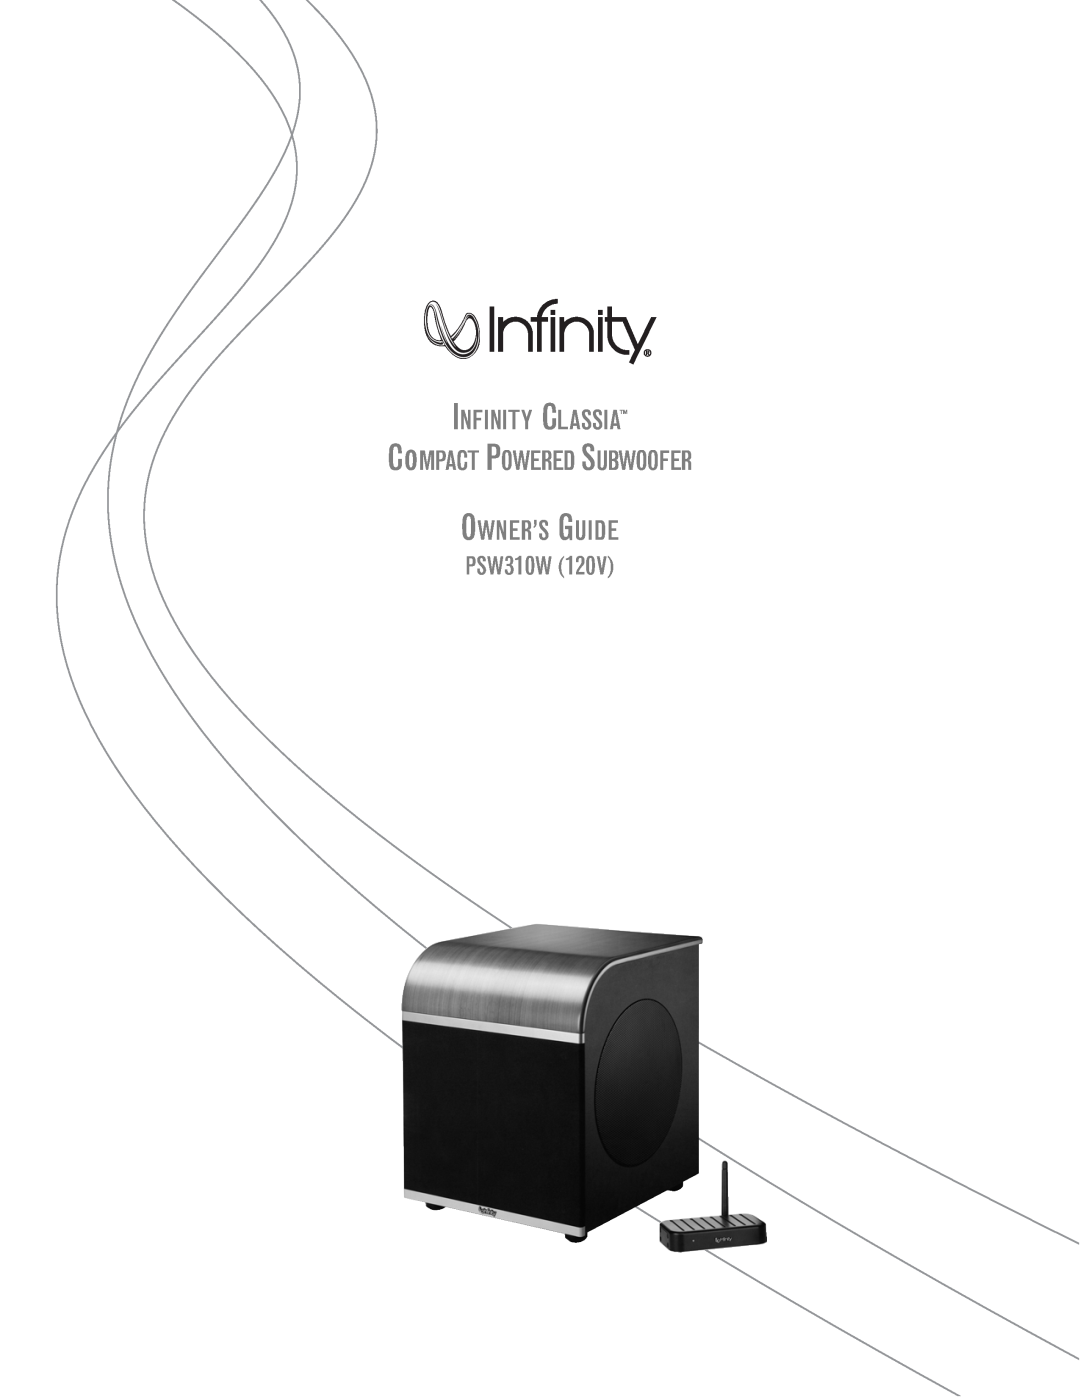 Infinity PSW310W manual INFINITY CLASSIA CoMPACT POWERED SUBWOOFER, Owner’S Guide 